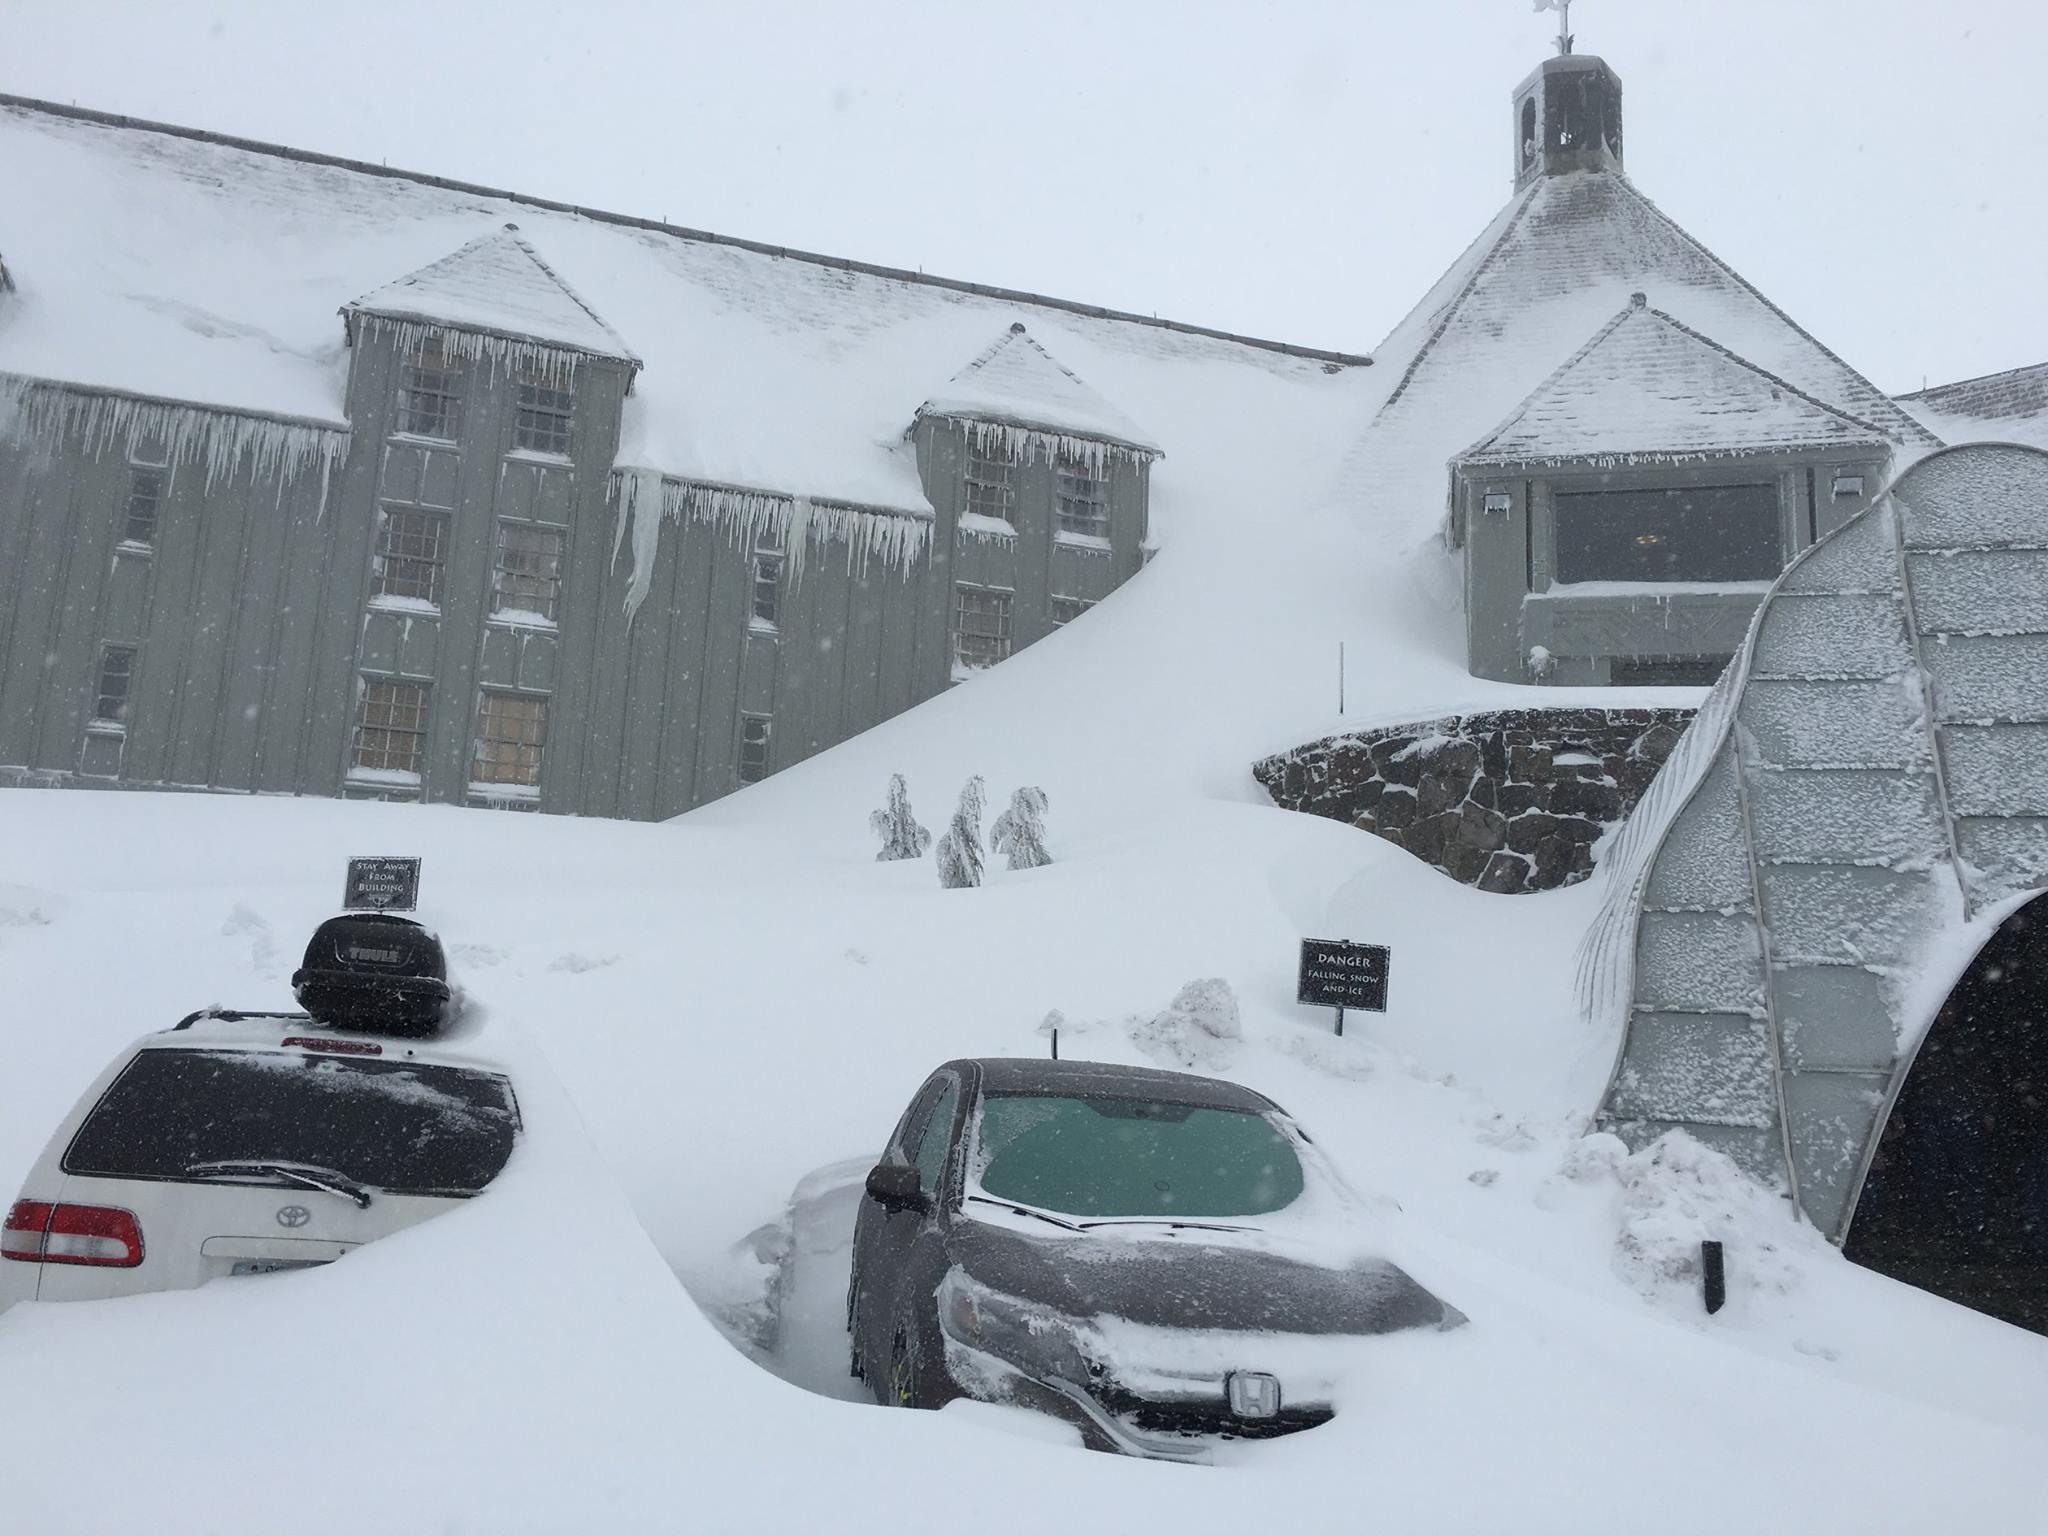 Timberline Lodge, OR on December 23rd, 2015. photo: timberline